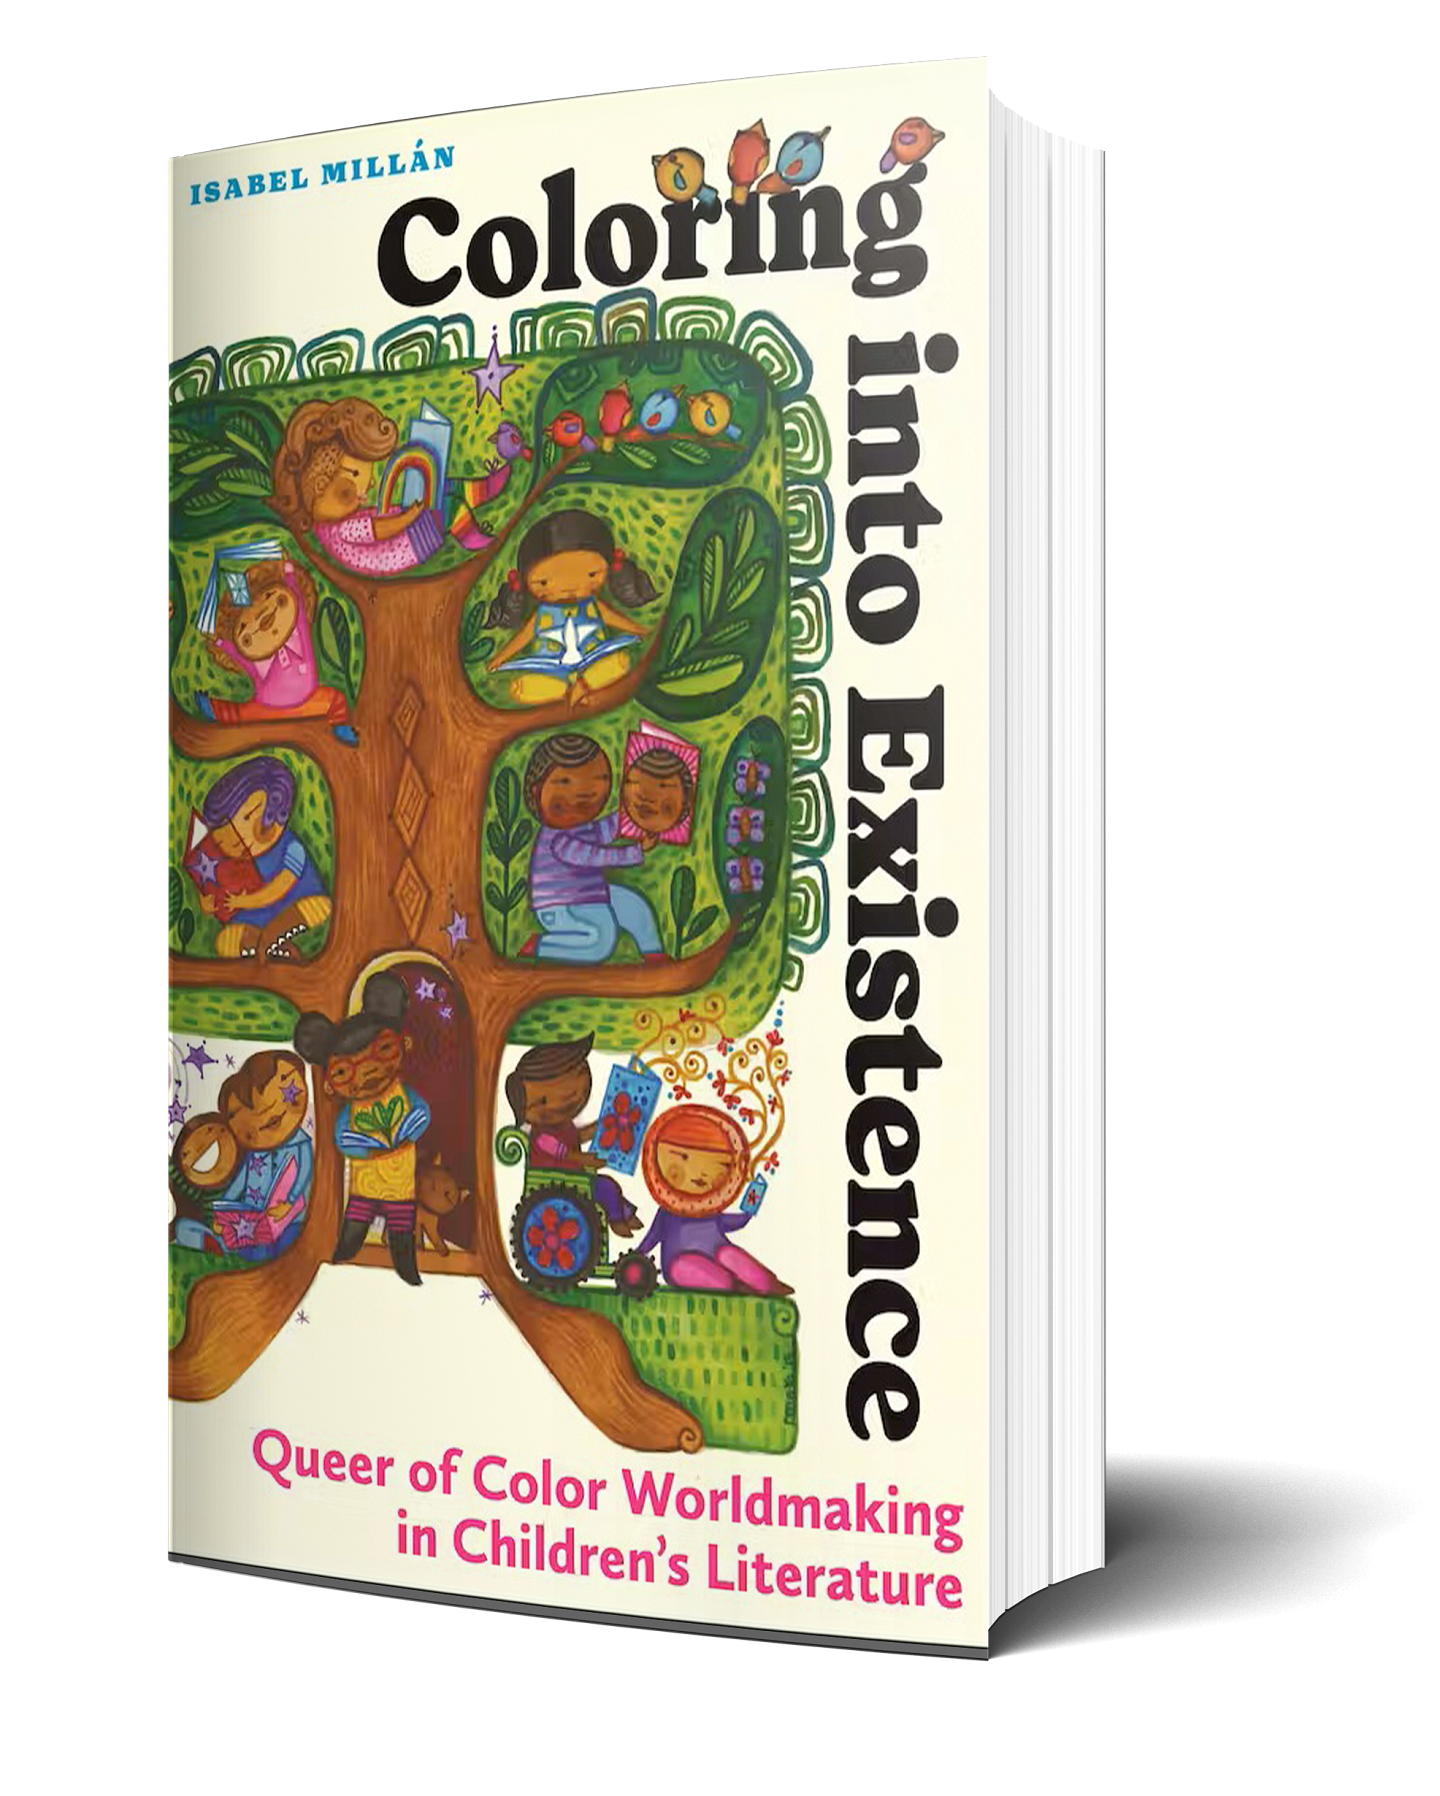 Coloring into Existence: Queer of Color Worldmaking in Children’s Literature